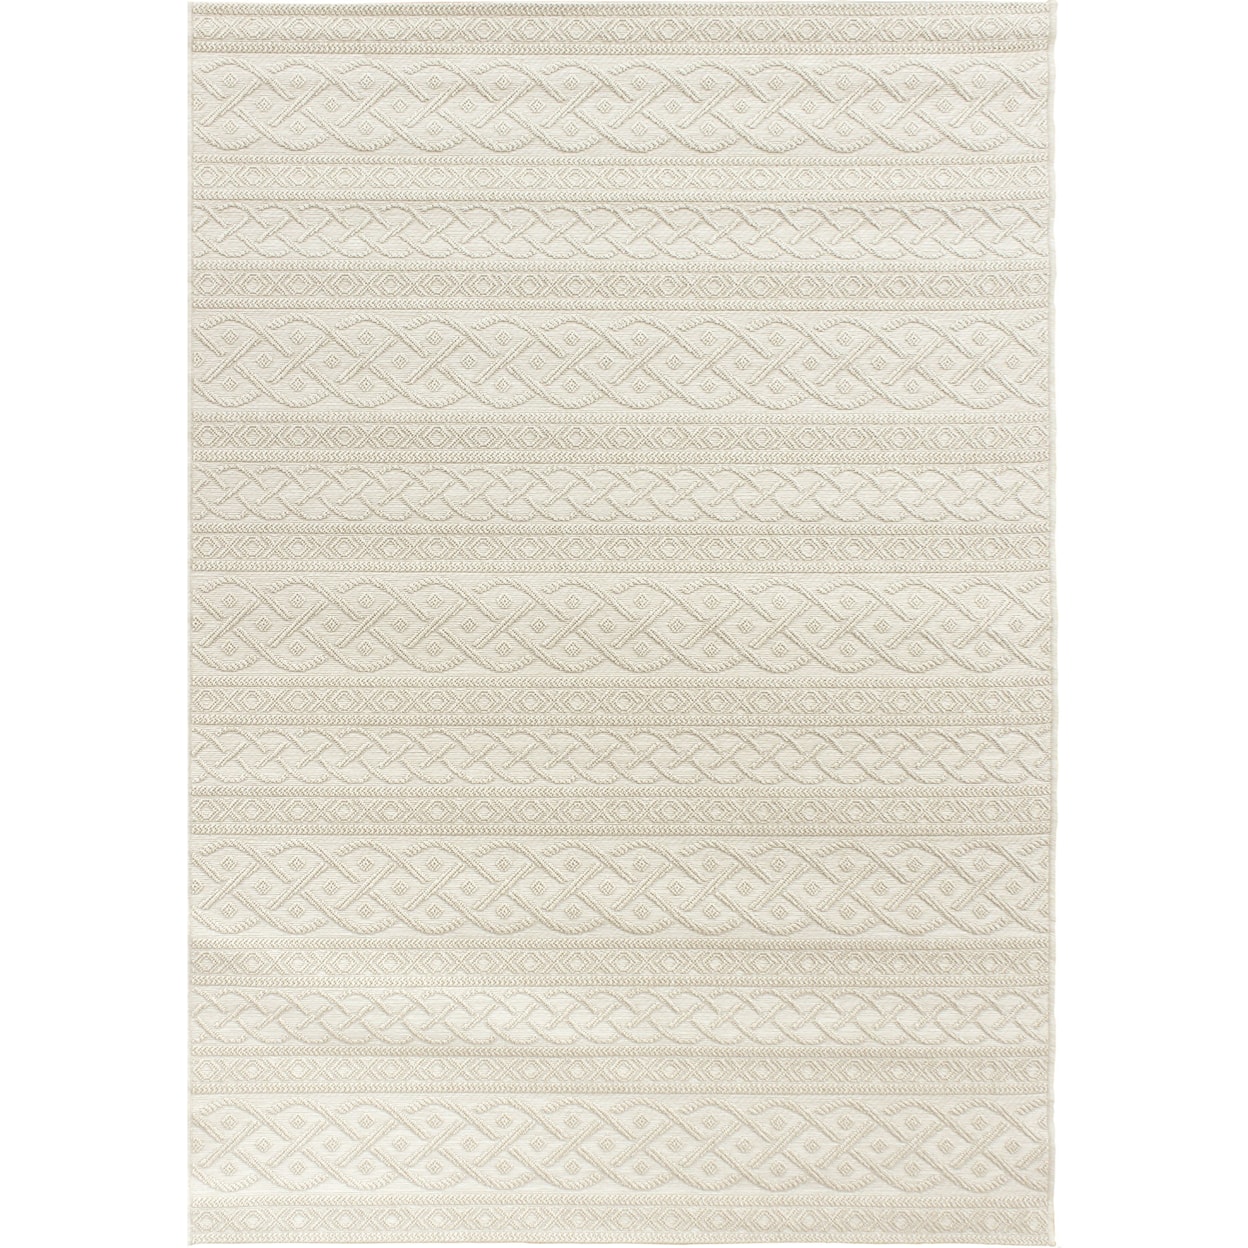 Orian Rugs Jersey Home Organic Cable ivory 5'1" x 7'6" Rug